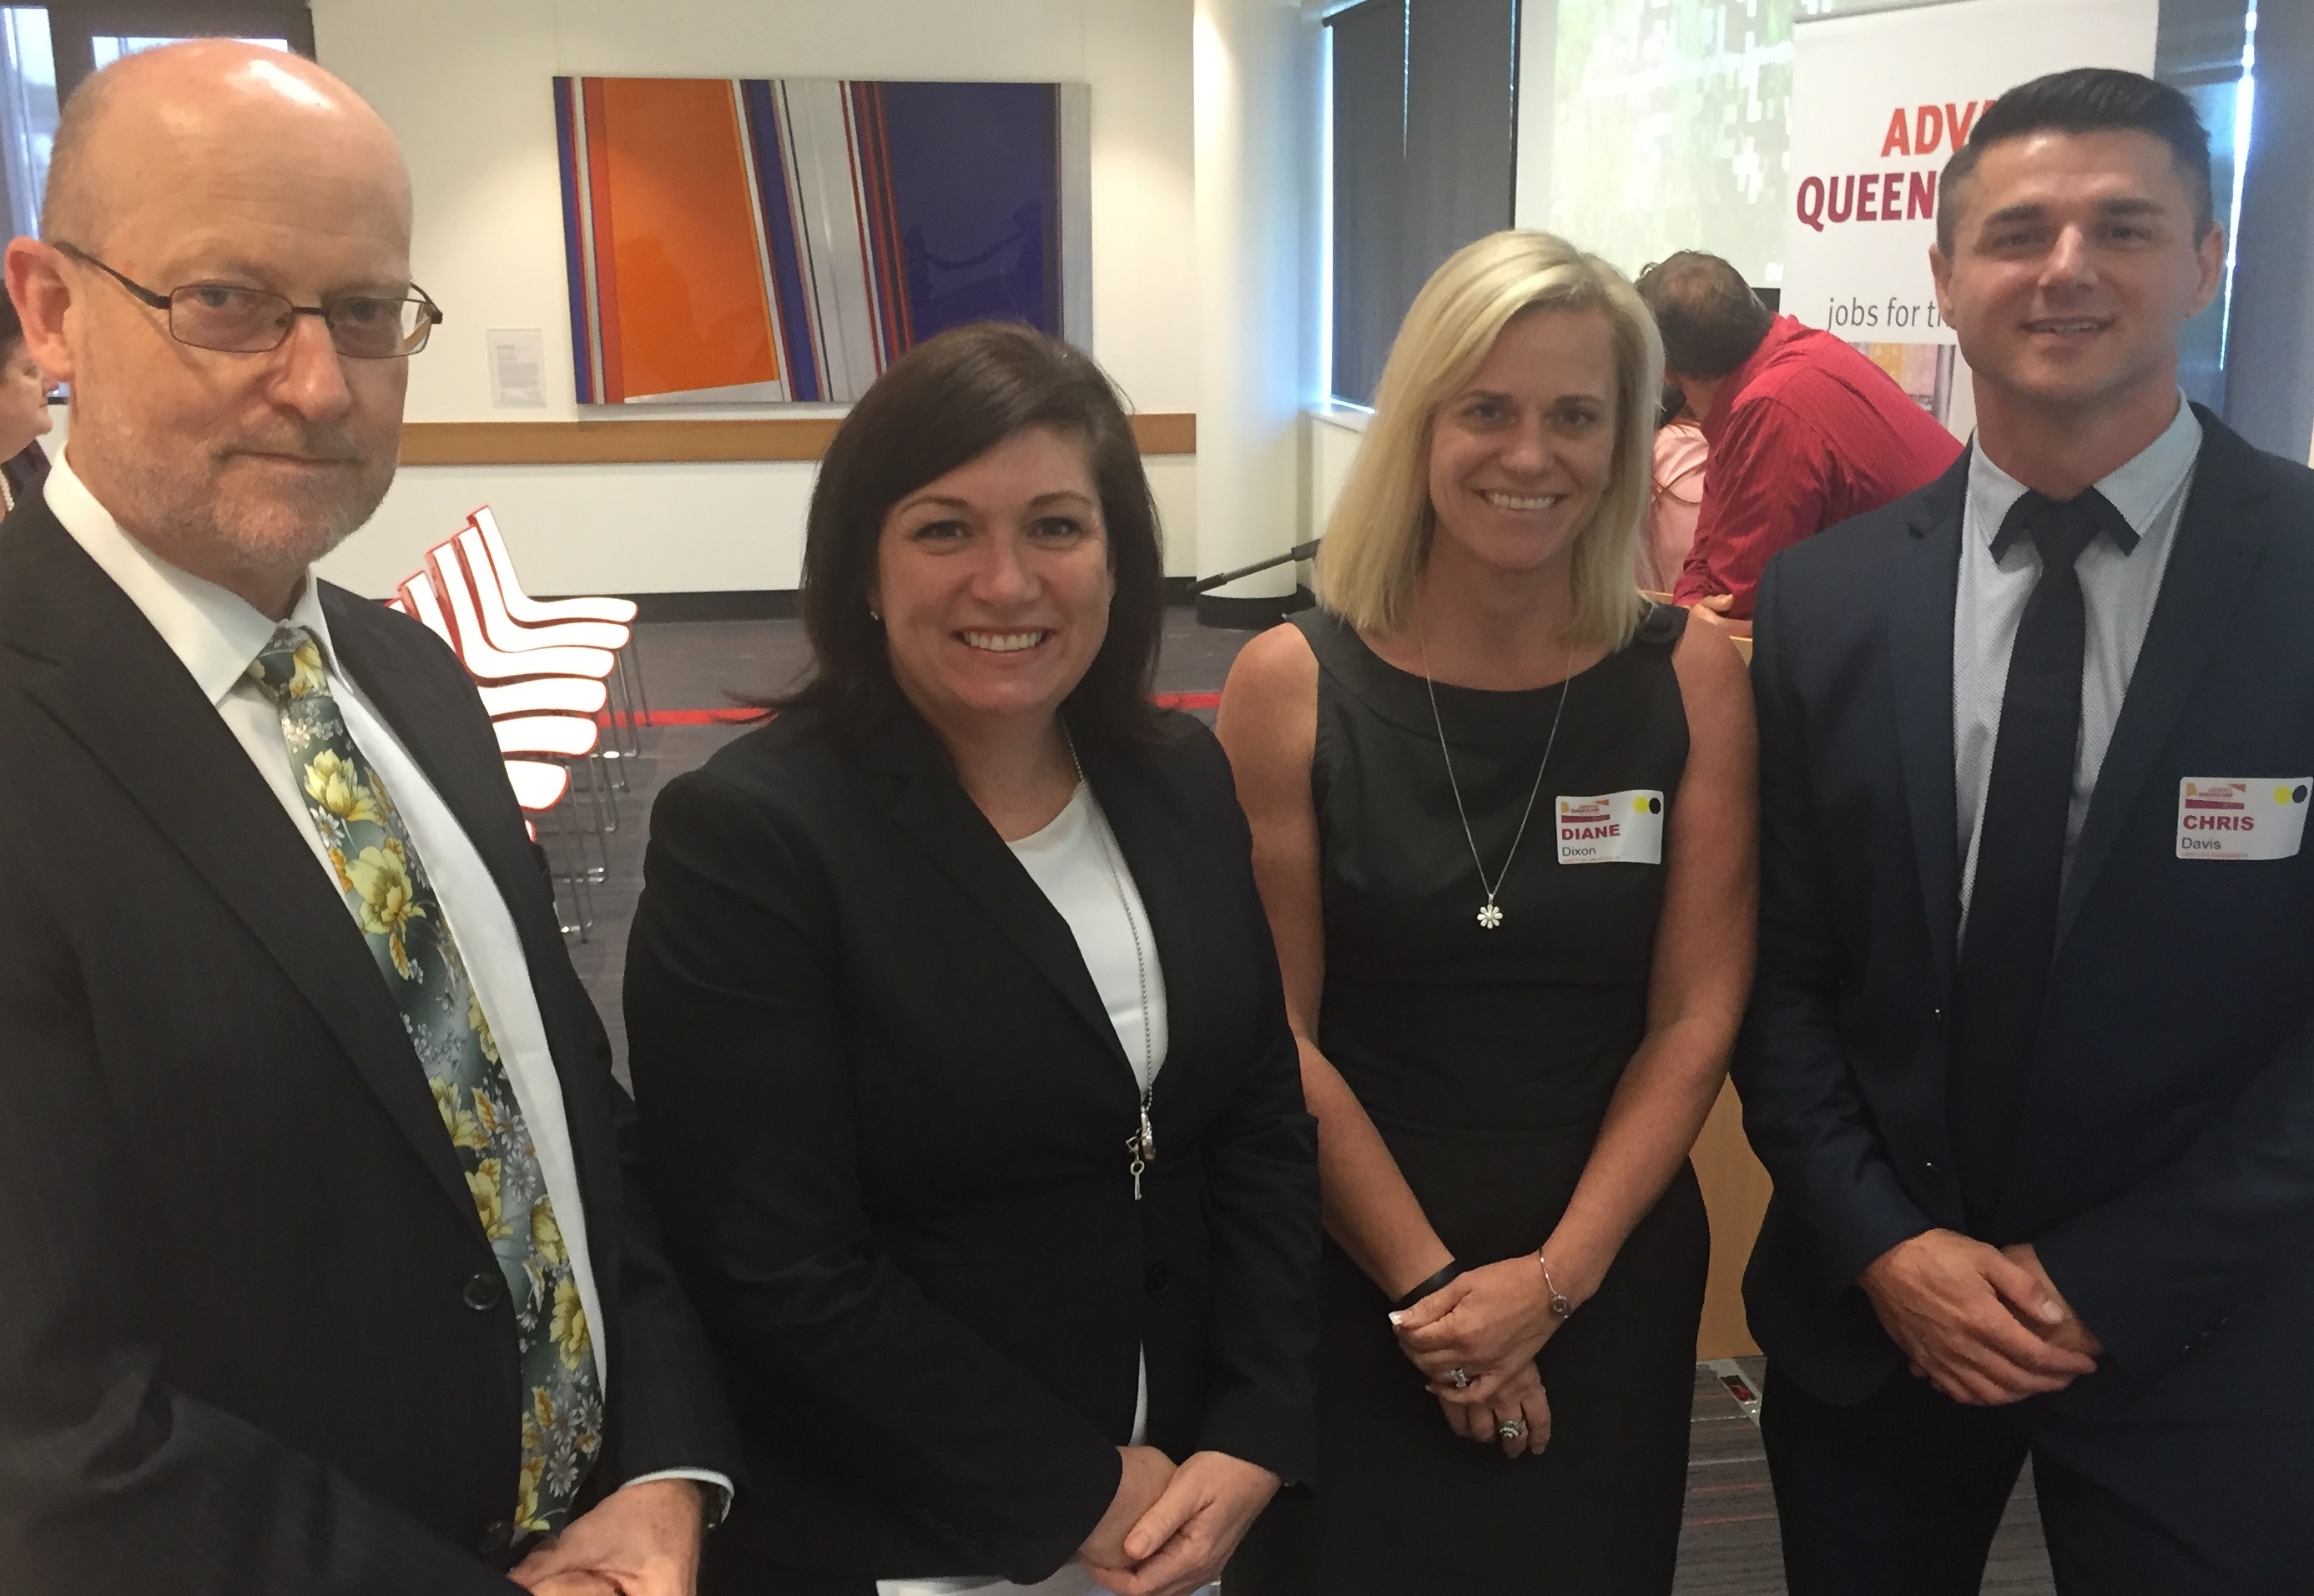 From left, Griffith University Senior Deputy Vice Chancellor, Professor Ned Pankhurst, Queensland Minister for Science and Innovation, The Honourable Leeanne Enoch MP, Project Manager for the Gold Coast Health and Knowledge Precinct, Ms Di Dixon, and General Manager of the Institute for Glycomics, Dr Chris Davis